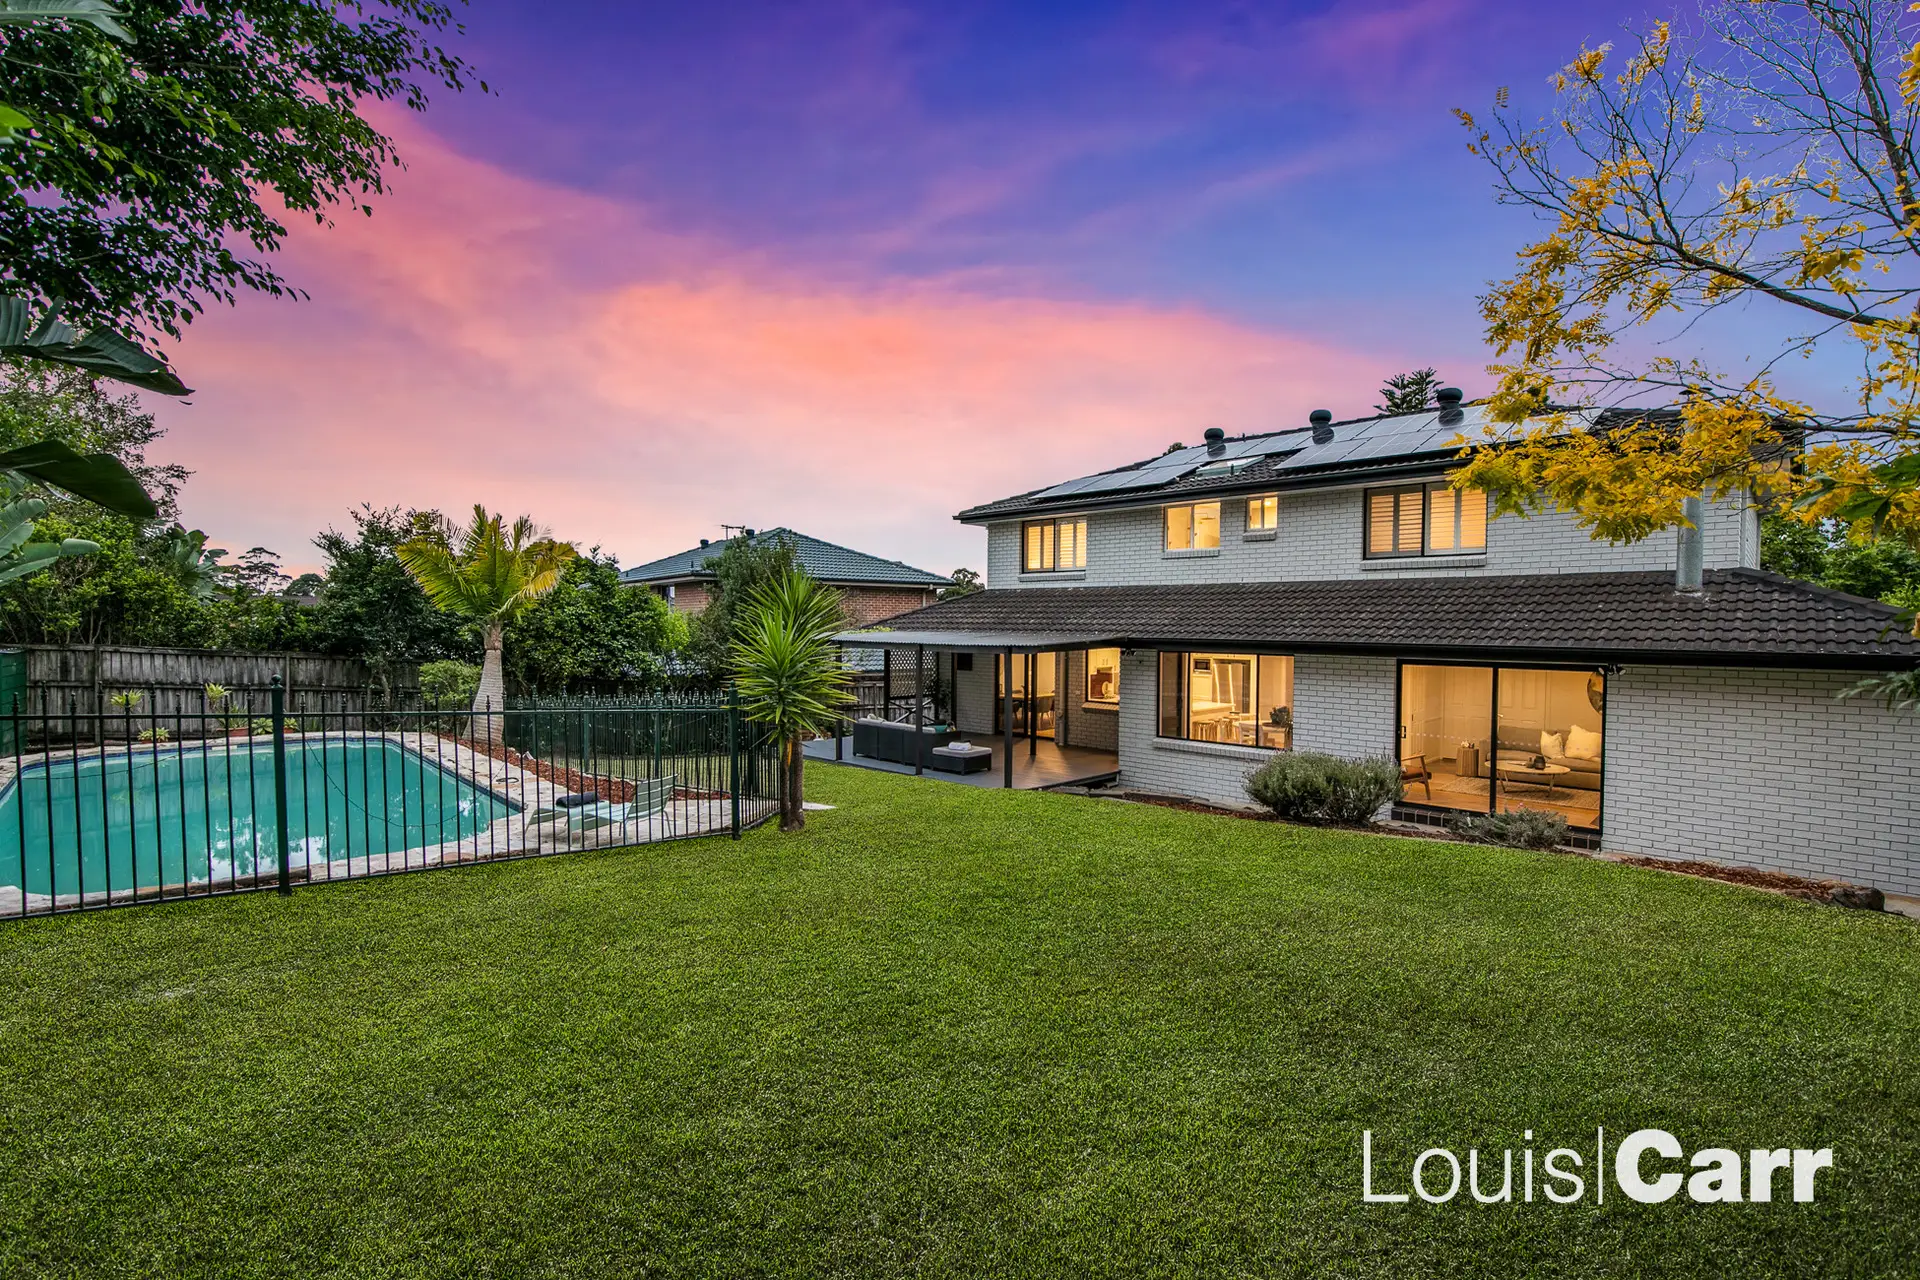 Photo #2: 12 Radley Place, Cherrybrook - Sold by Louis Carr Real Estate